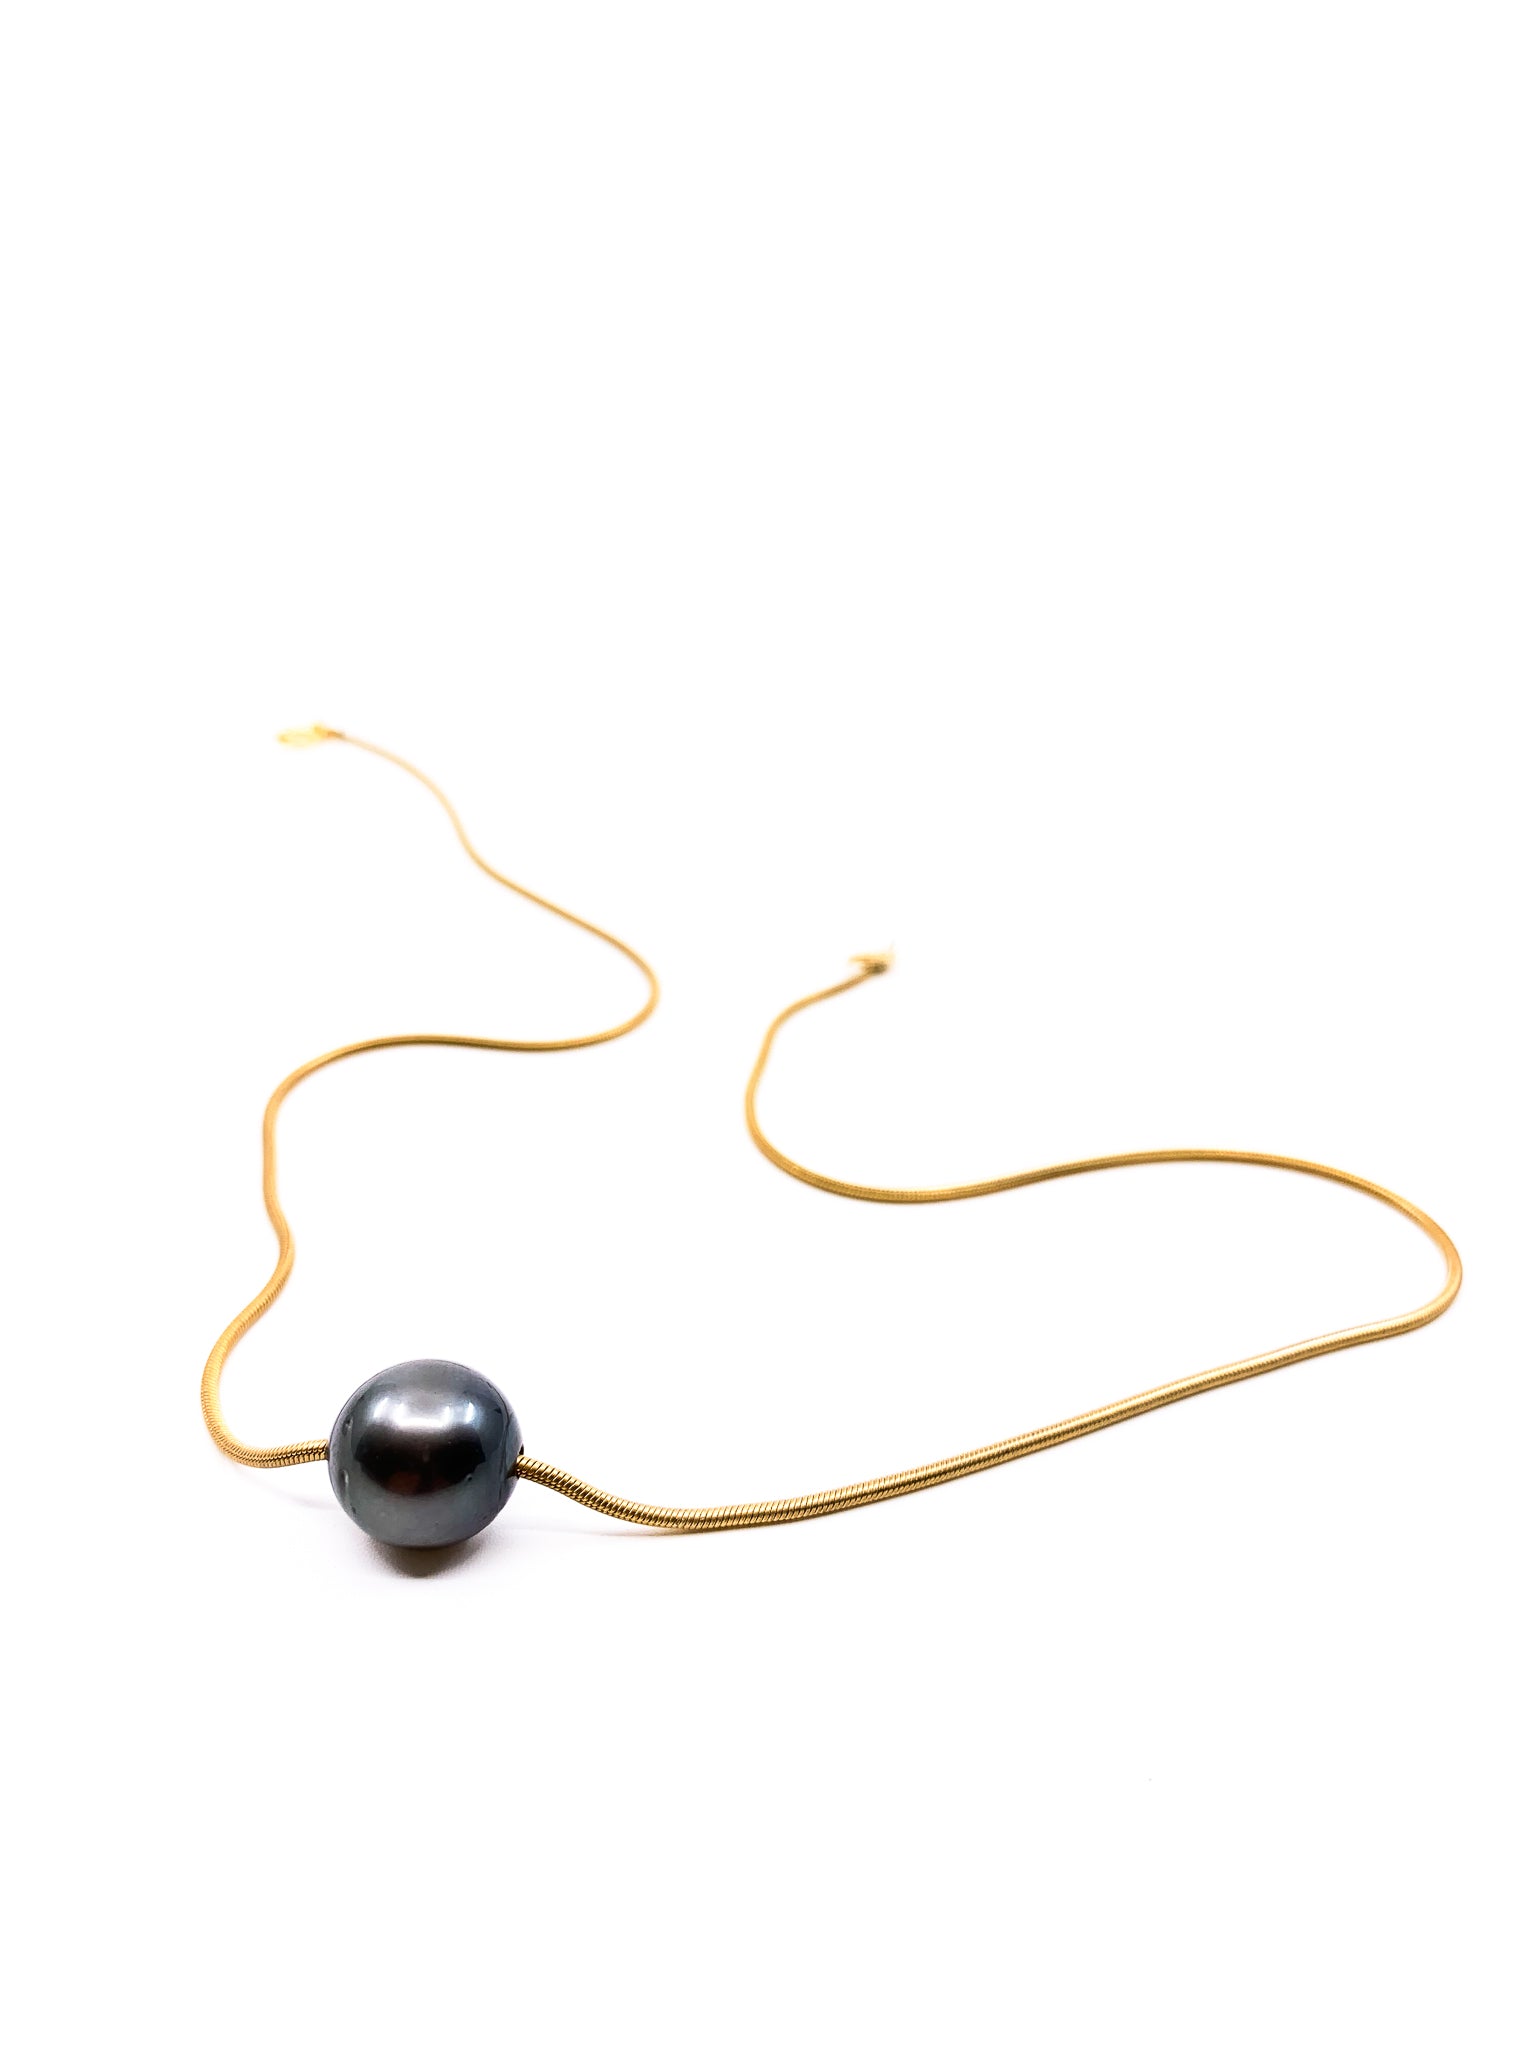 floating tahitian pearl snake gold chain necklace by eve black jewelry made in Hawaii